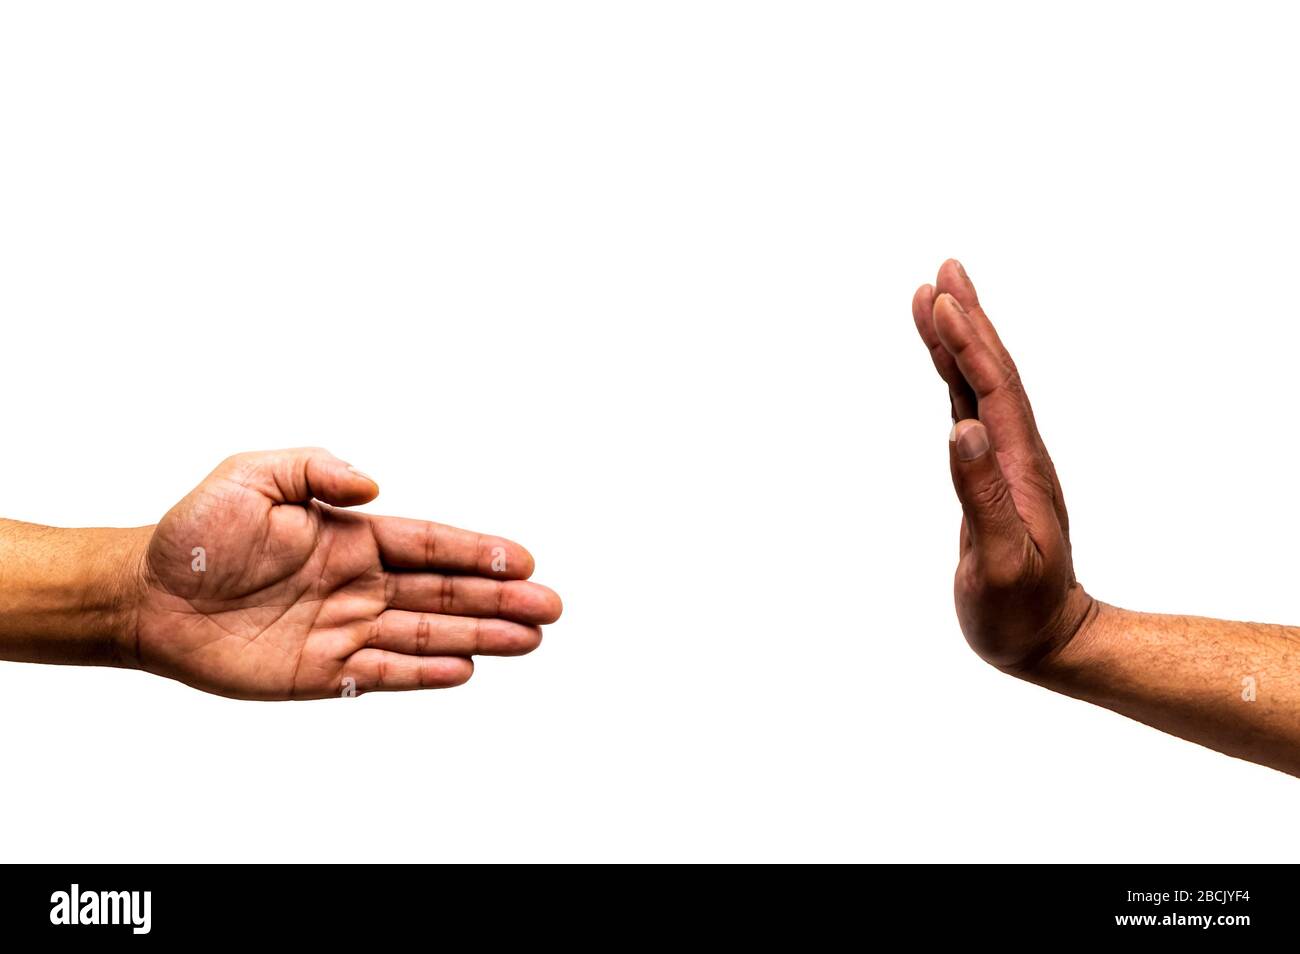 Two hands not touching on a white background with copy space. Physical distancing concept. Stock Photo